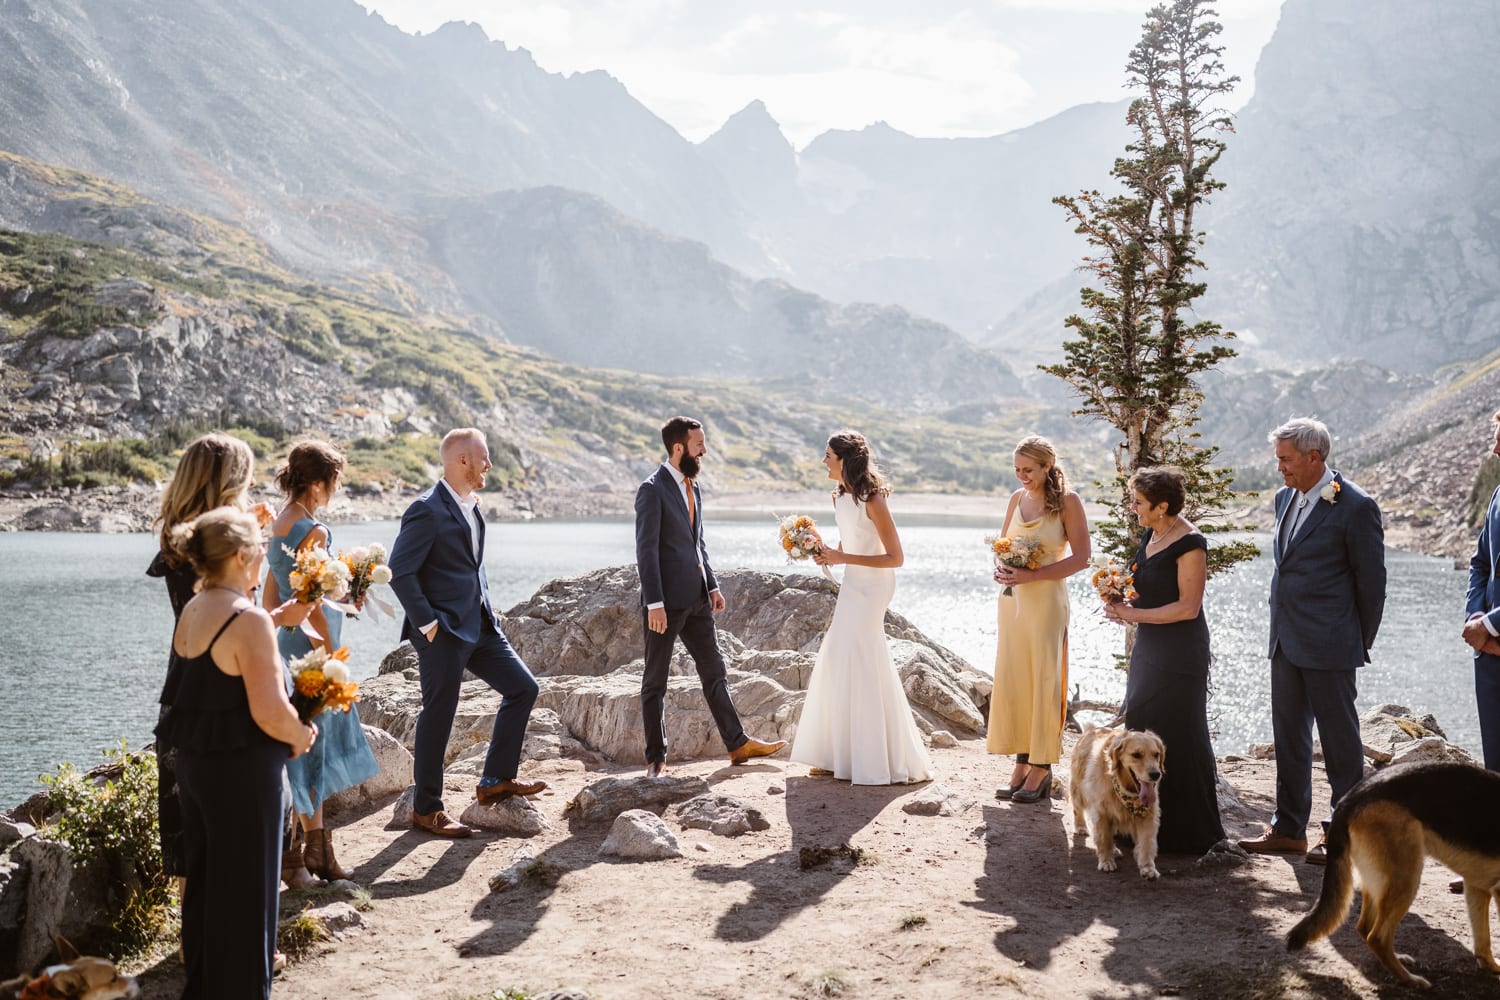 A couple getting married with their families at an alpine lake in Colorado.